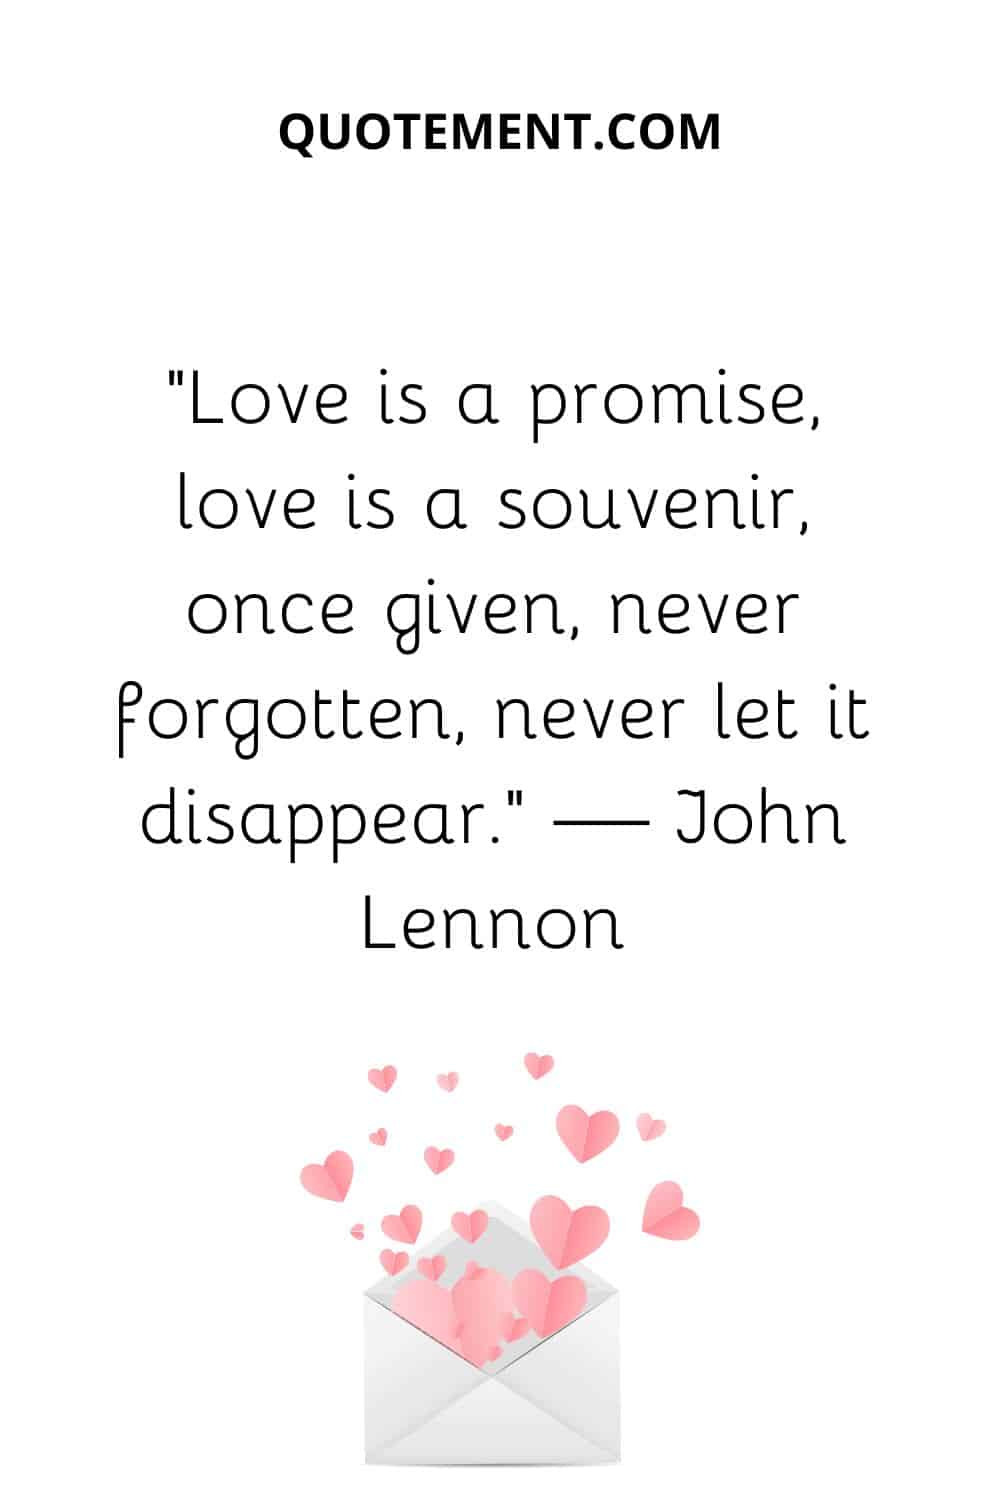 “Love is a promise, love is a souvenir, once given, never forgotten, never let it disappear.” — John Lennon